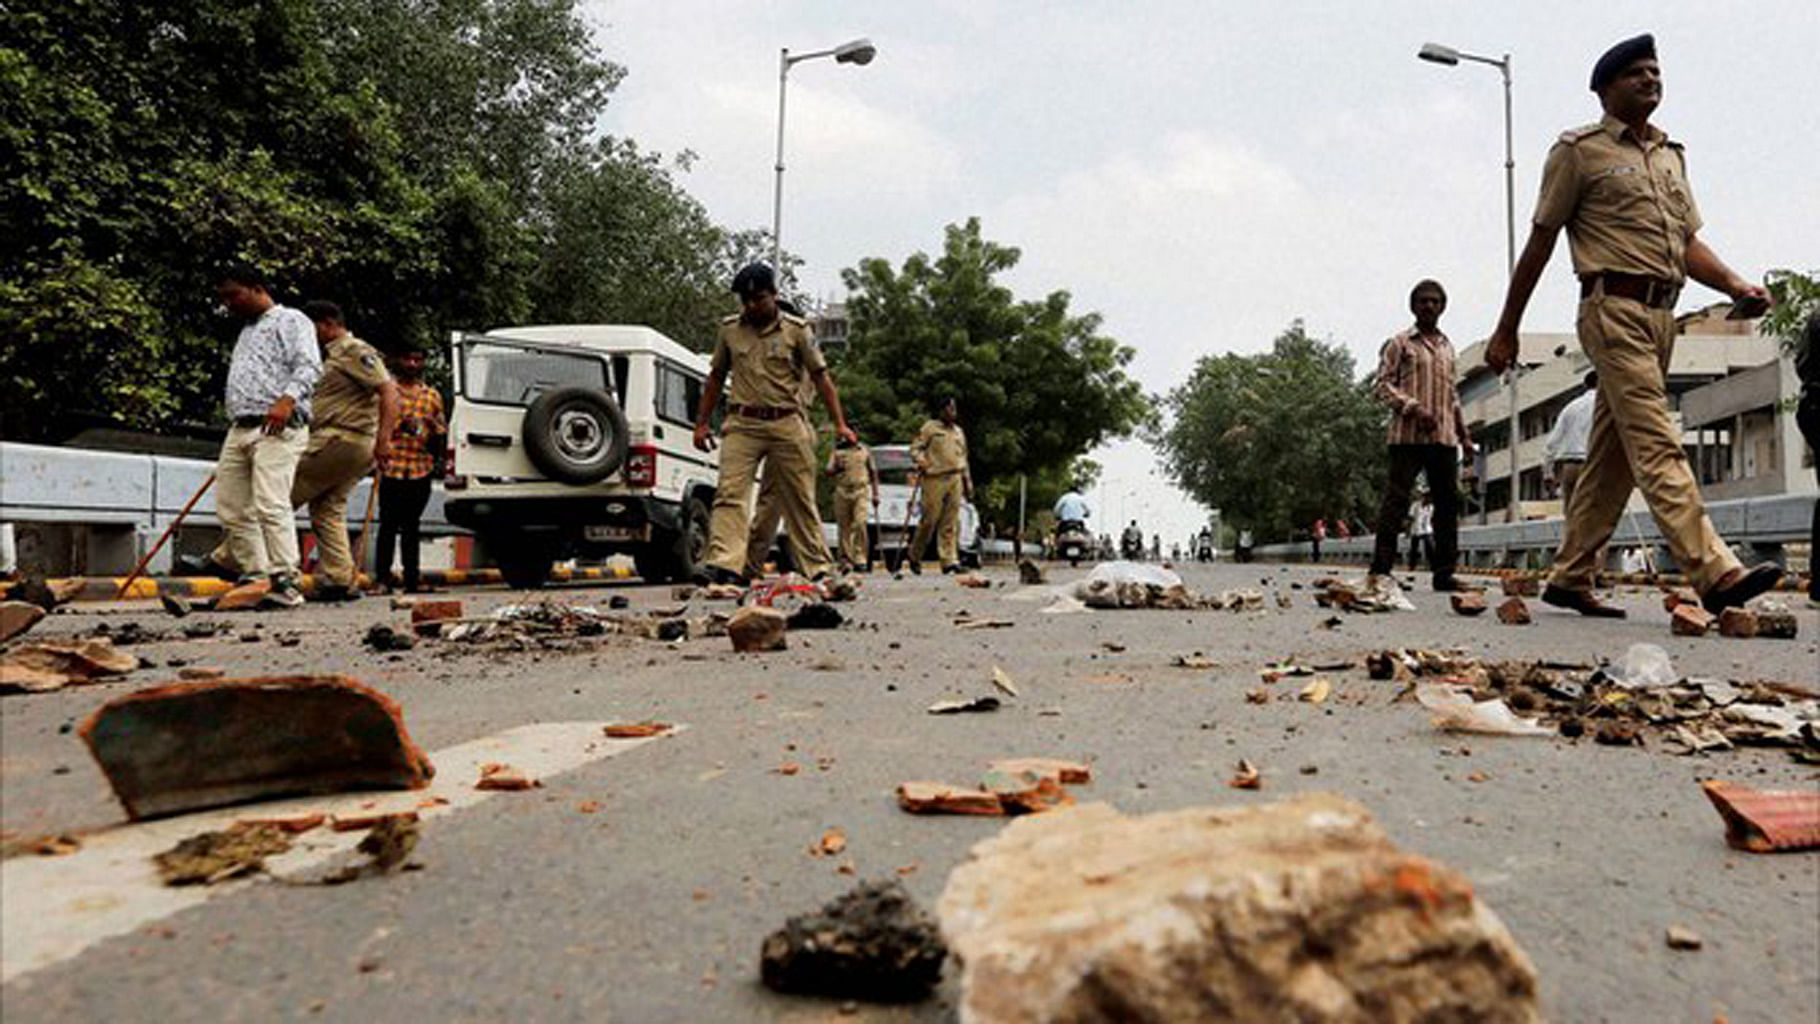 

Policemen remove stones put by members of Dalit community to block traffic during their protests in Ahmedabad. (Photo: PTI)